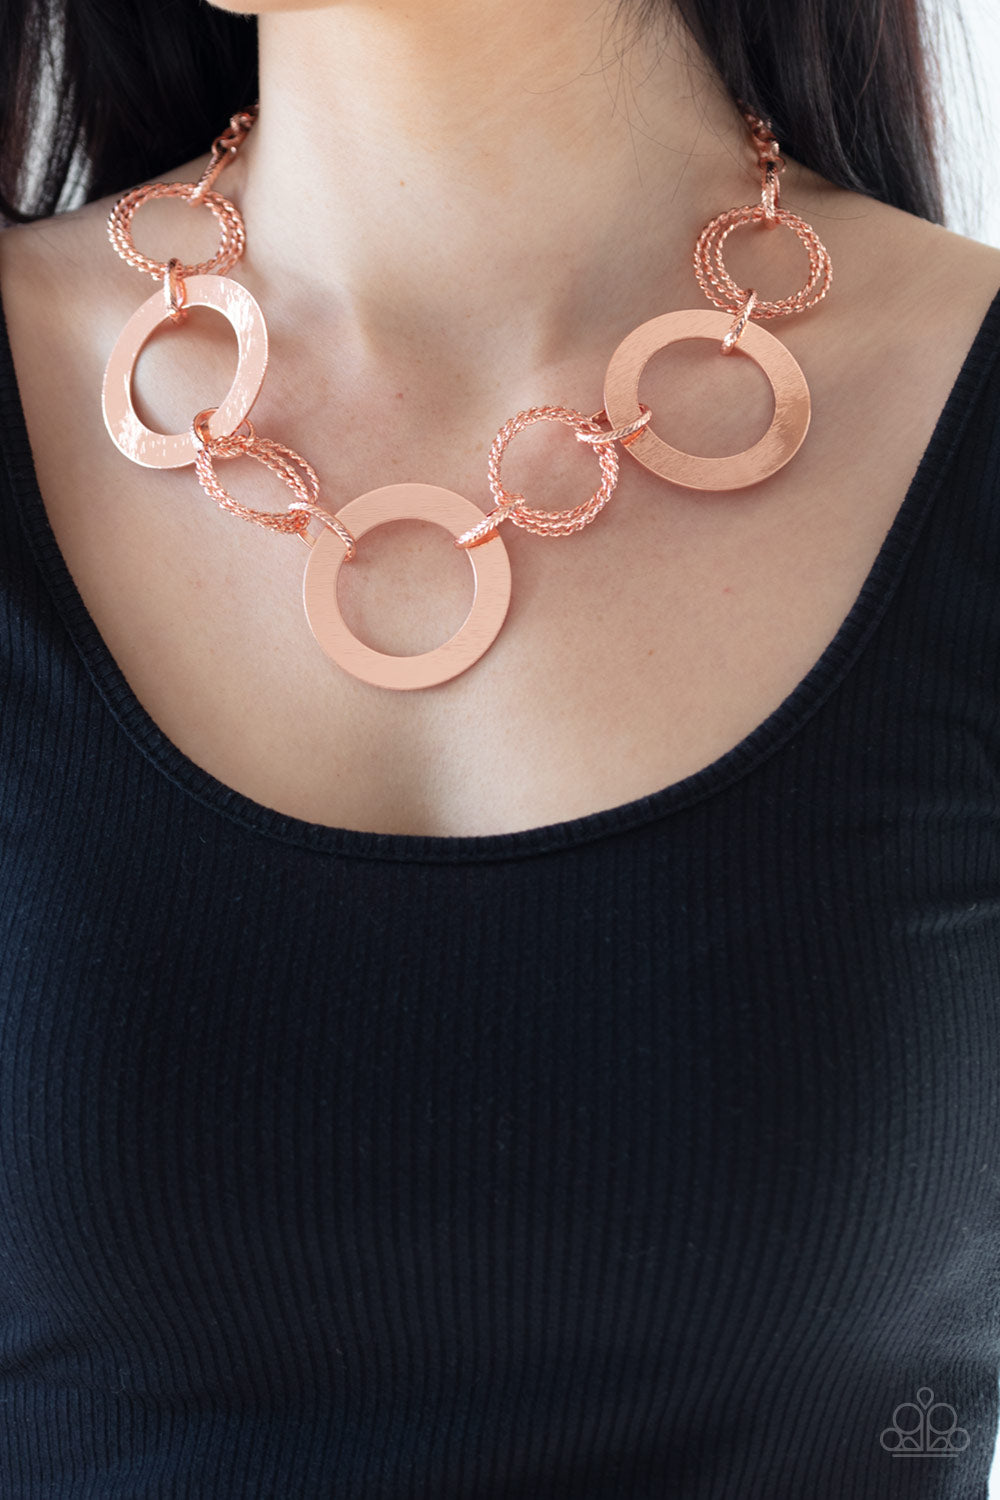 Ringed In Radiance - Copper Necklace 1001N